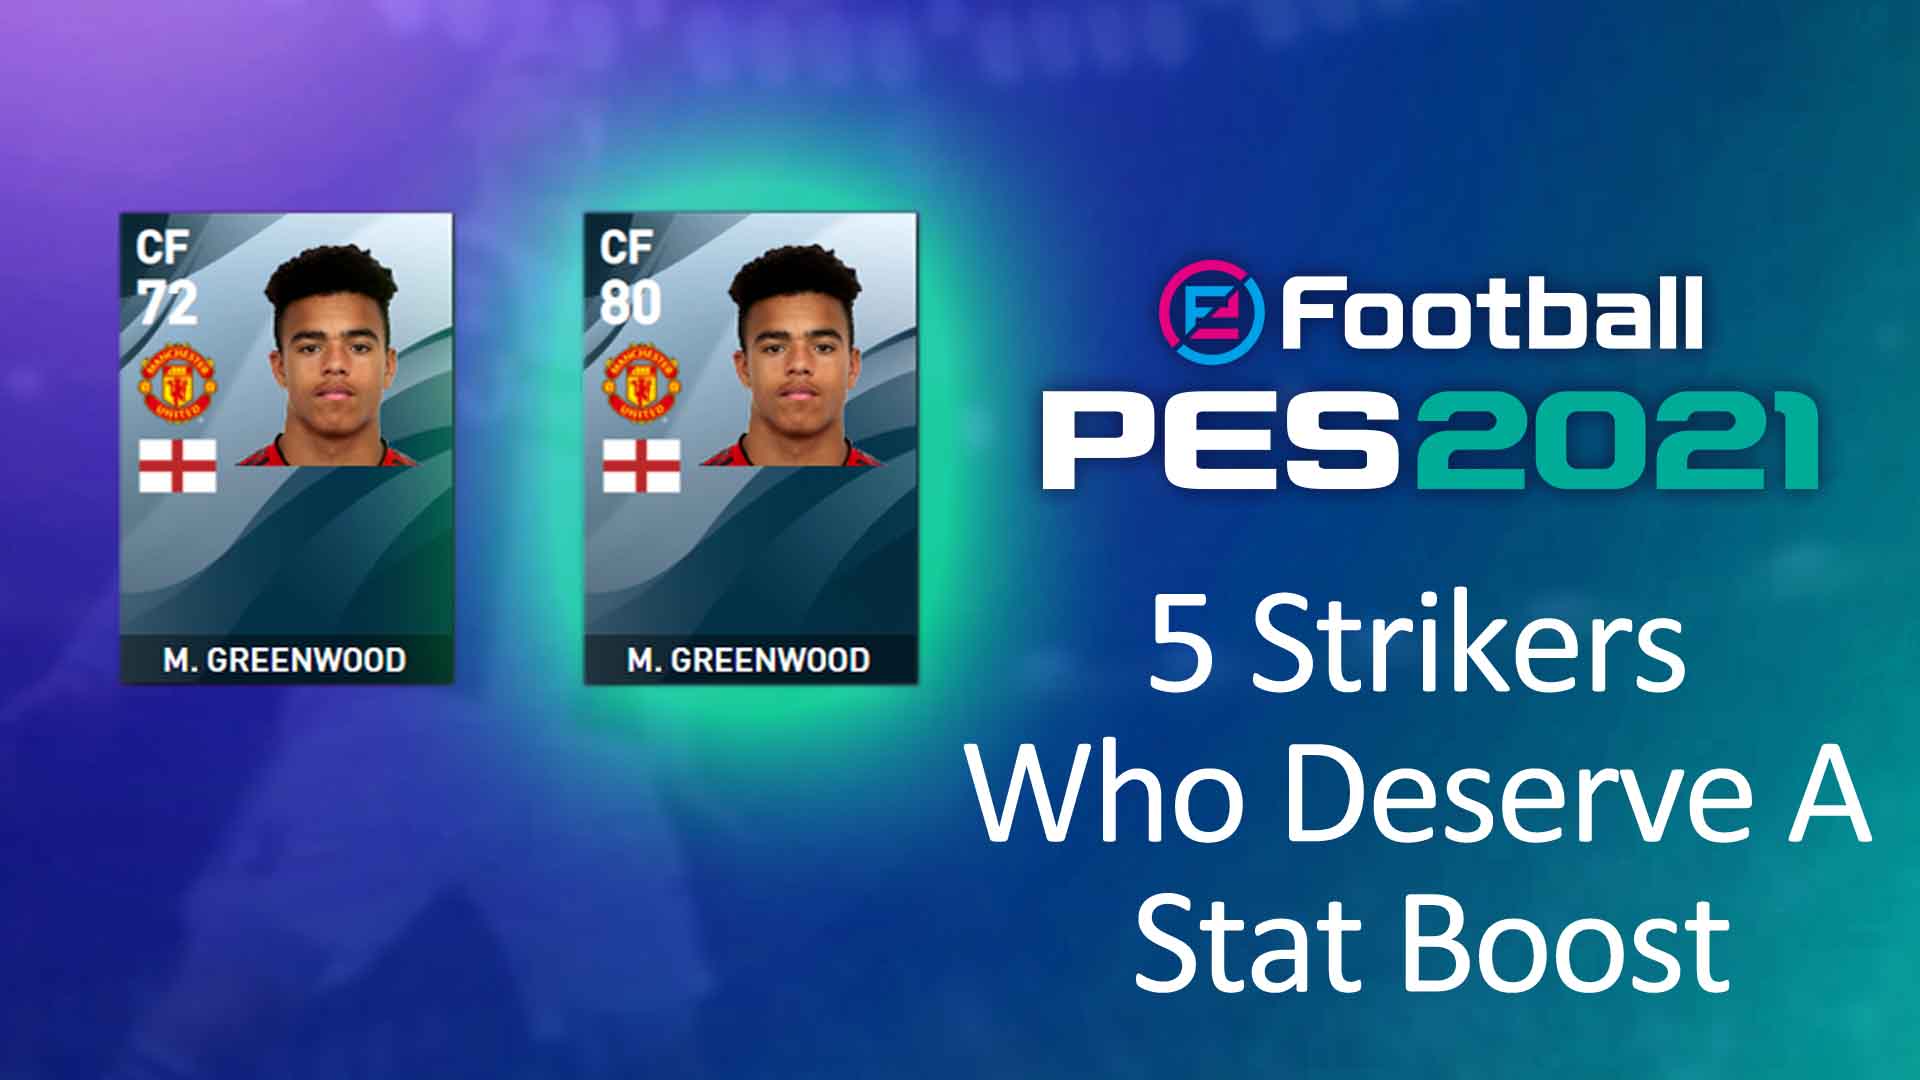 Pes 2021 5 Strikers Who Deserve A Stat Boost Pesuniverse